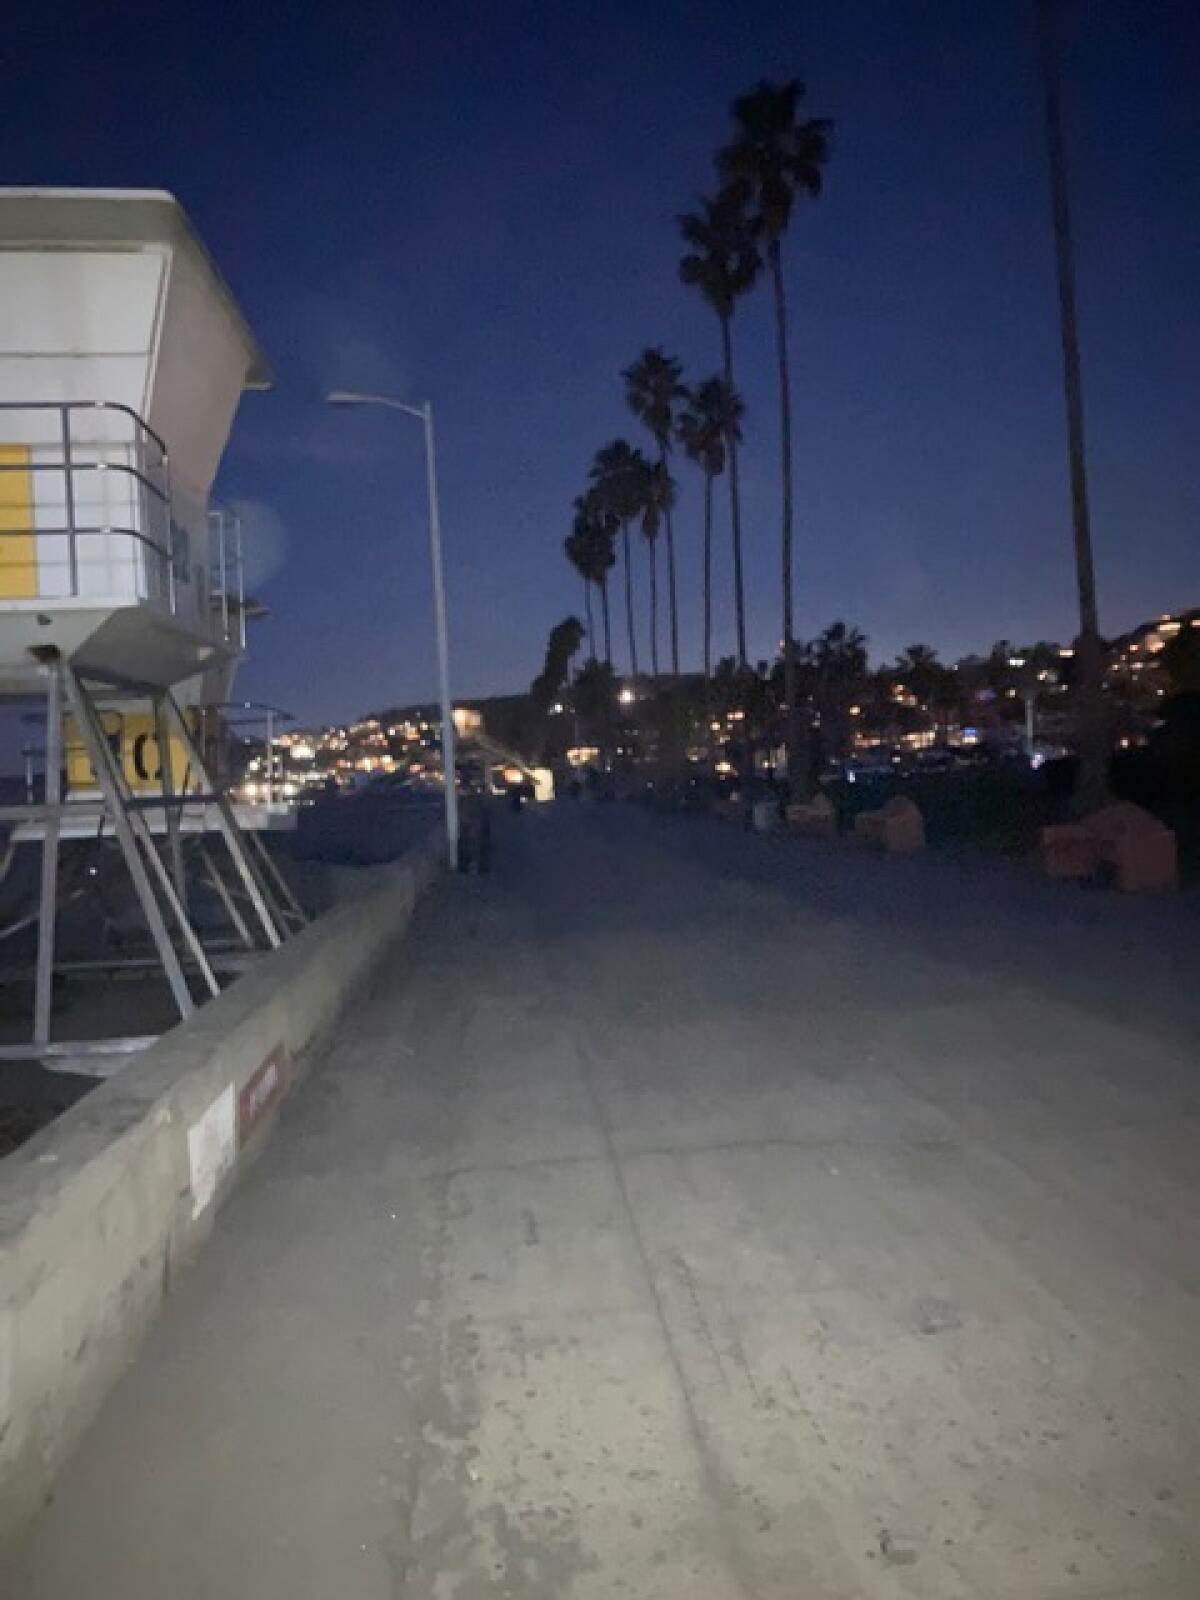 All the streetlights along the boardwalk at La Jolla Shores are out.